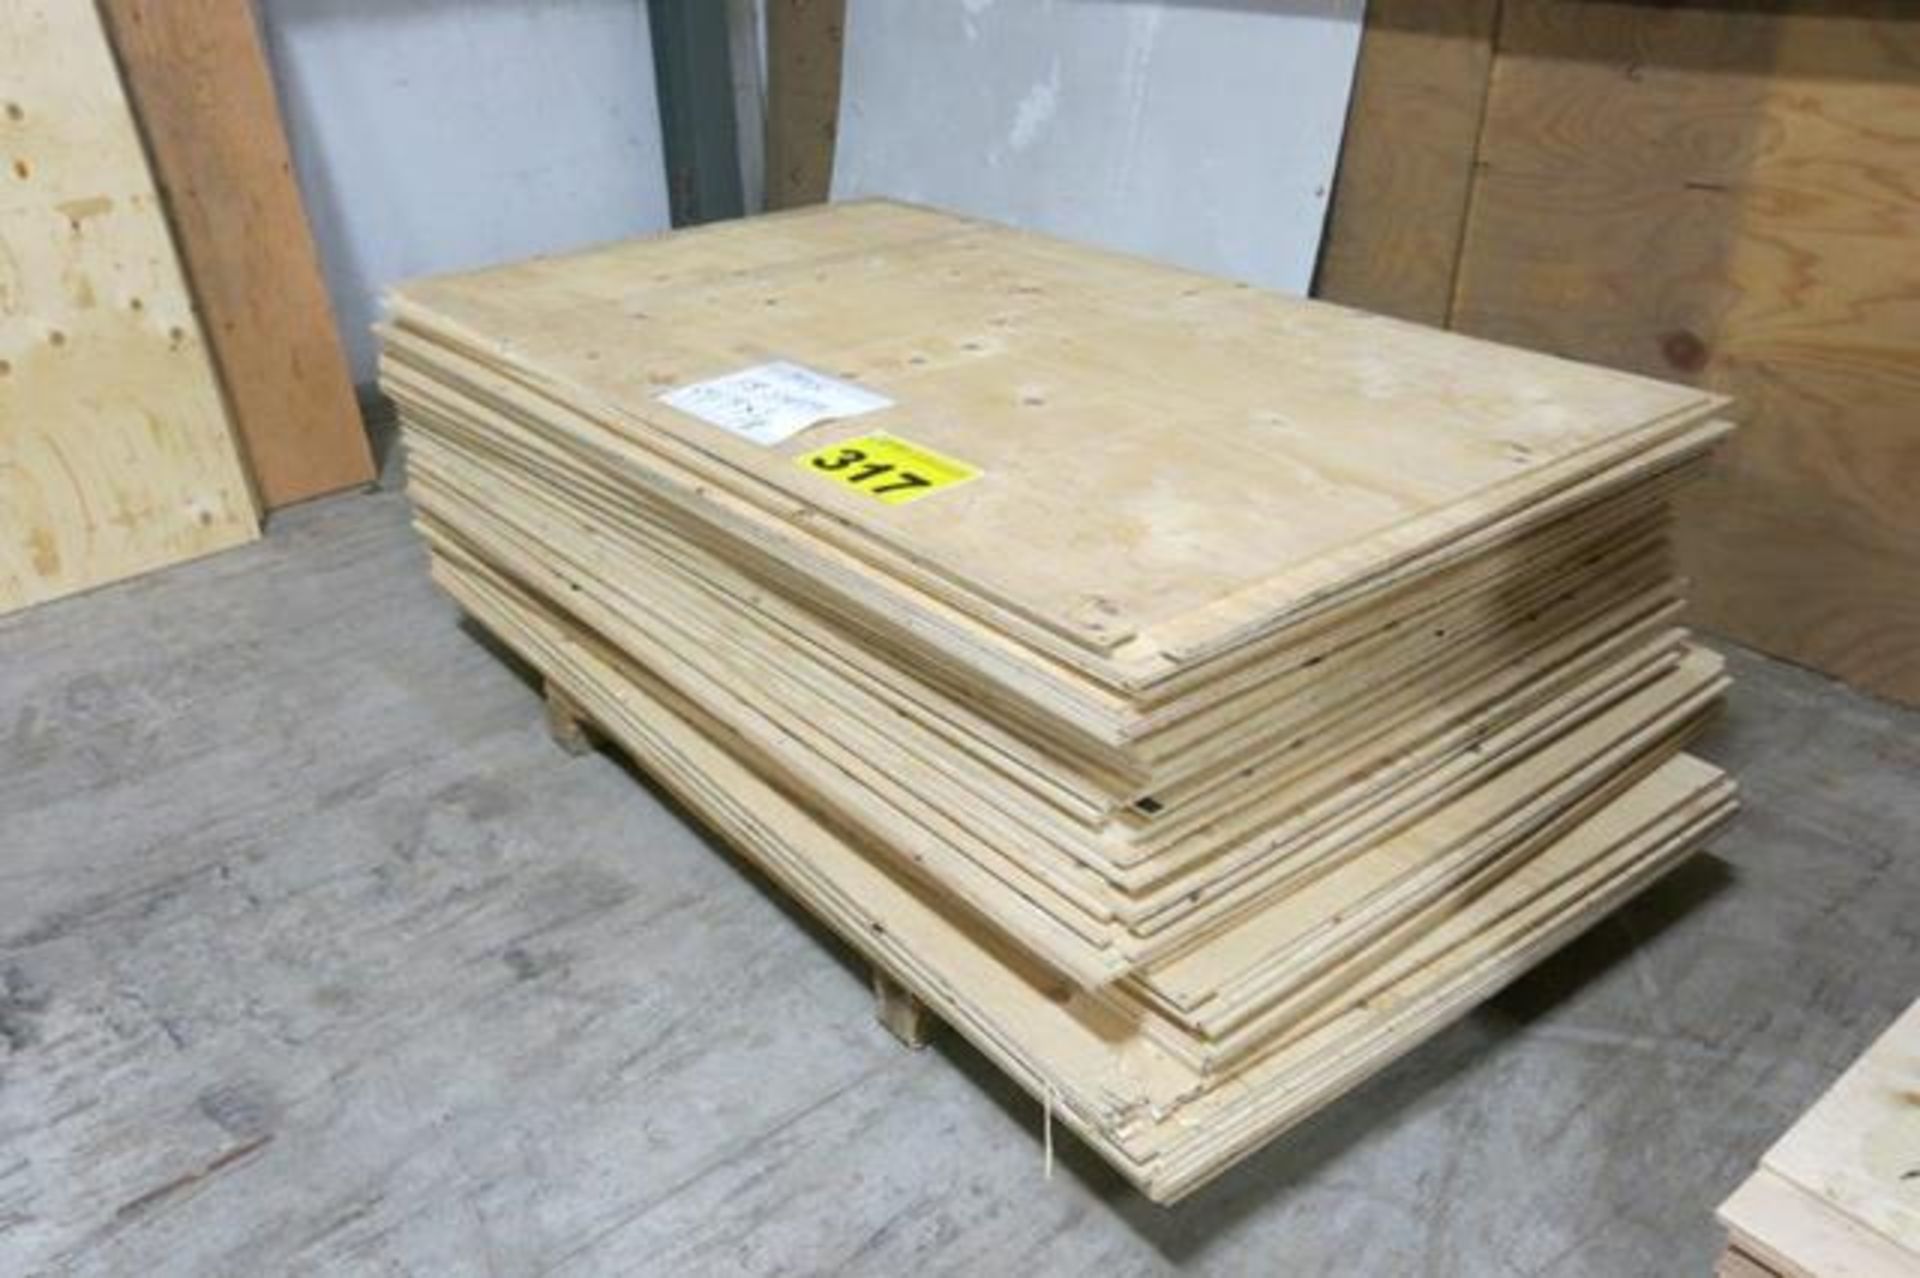 LOT OF 58 SHEETS (APPROX.) OF 44" X 75" X 3/8", PLYWOOD